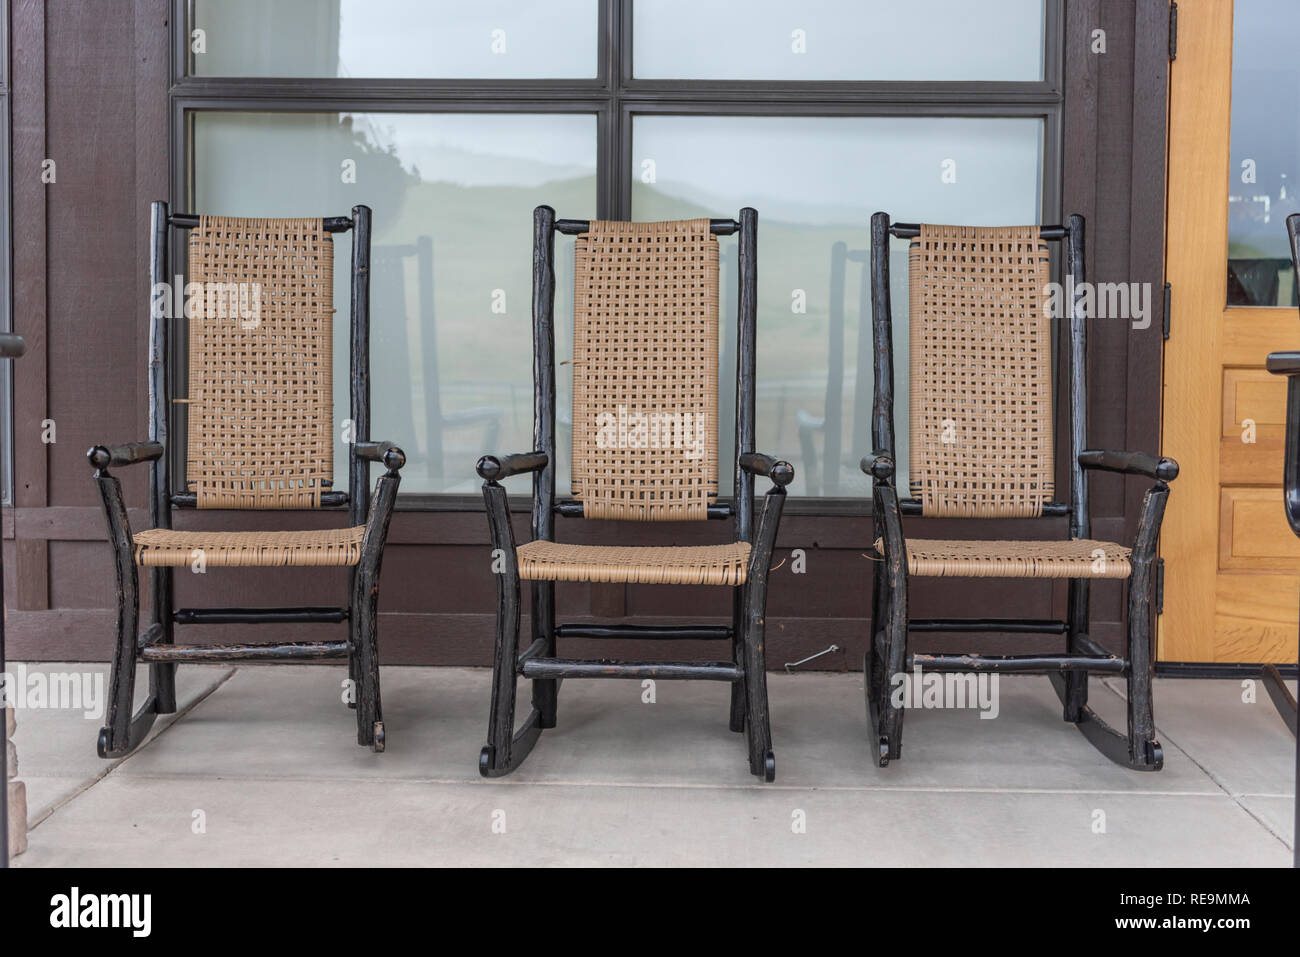 Three Wood and Wicker Rocking Chairs in front of Building Stock Photo